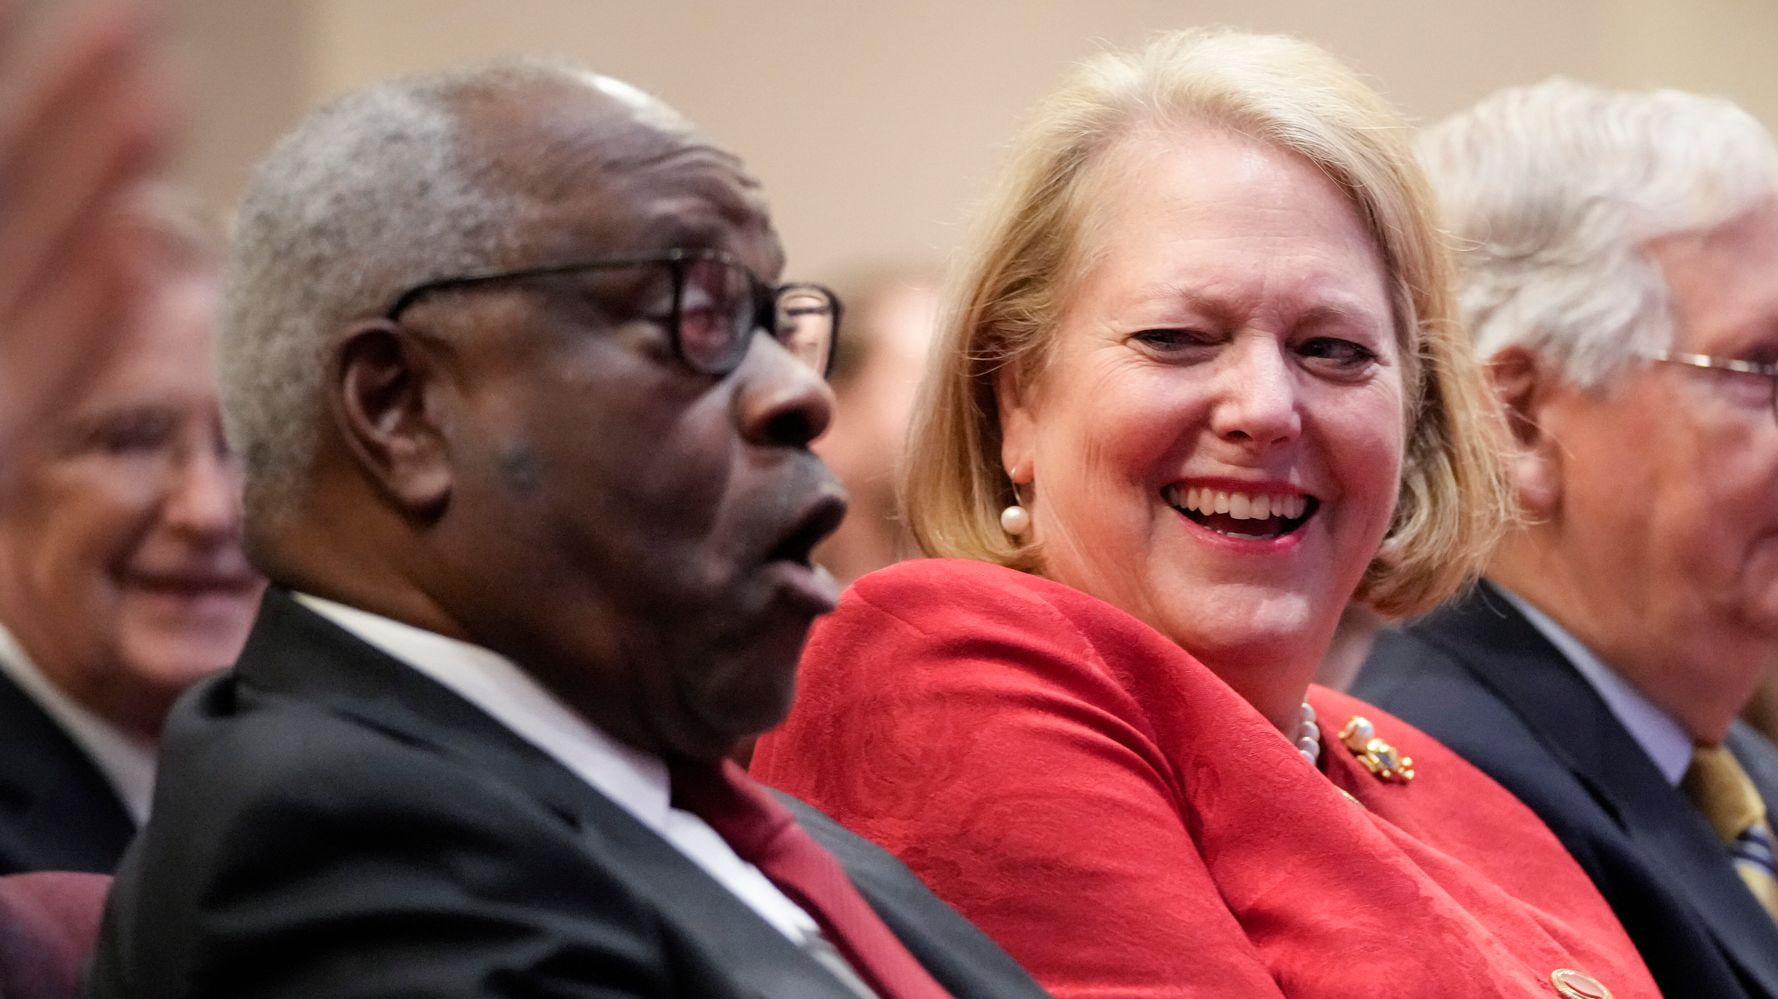 Critics Clamor For Clarence Thomas To Quit, Be Impeached Or Recuse Himself From Cases